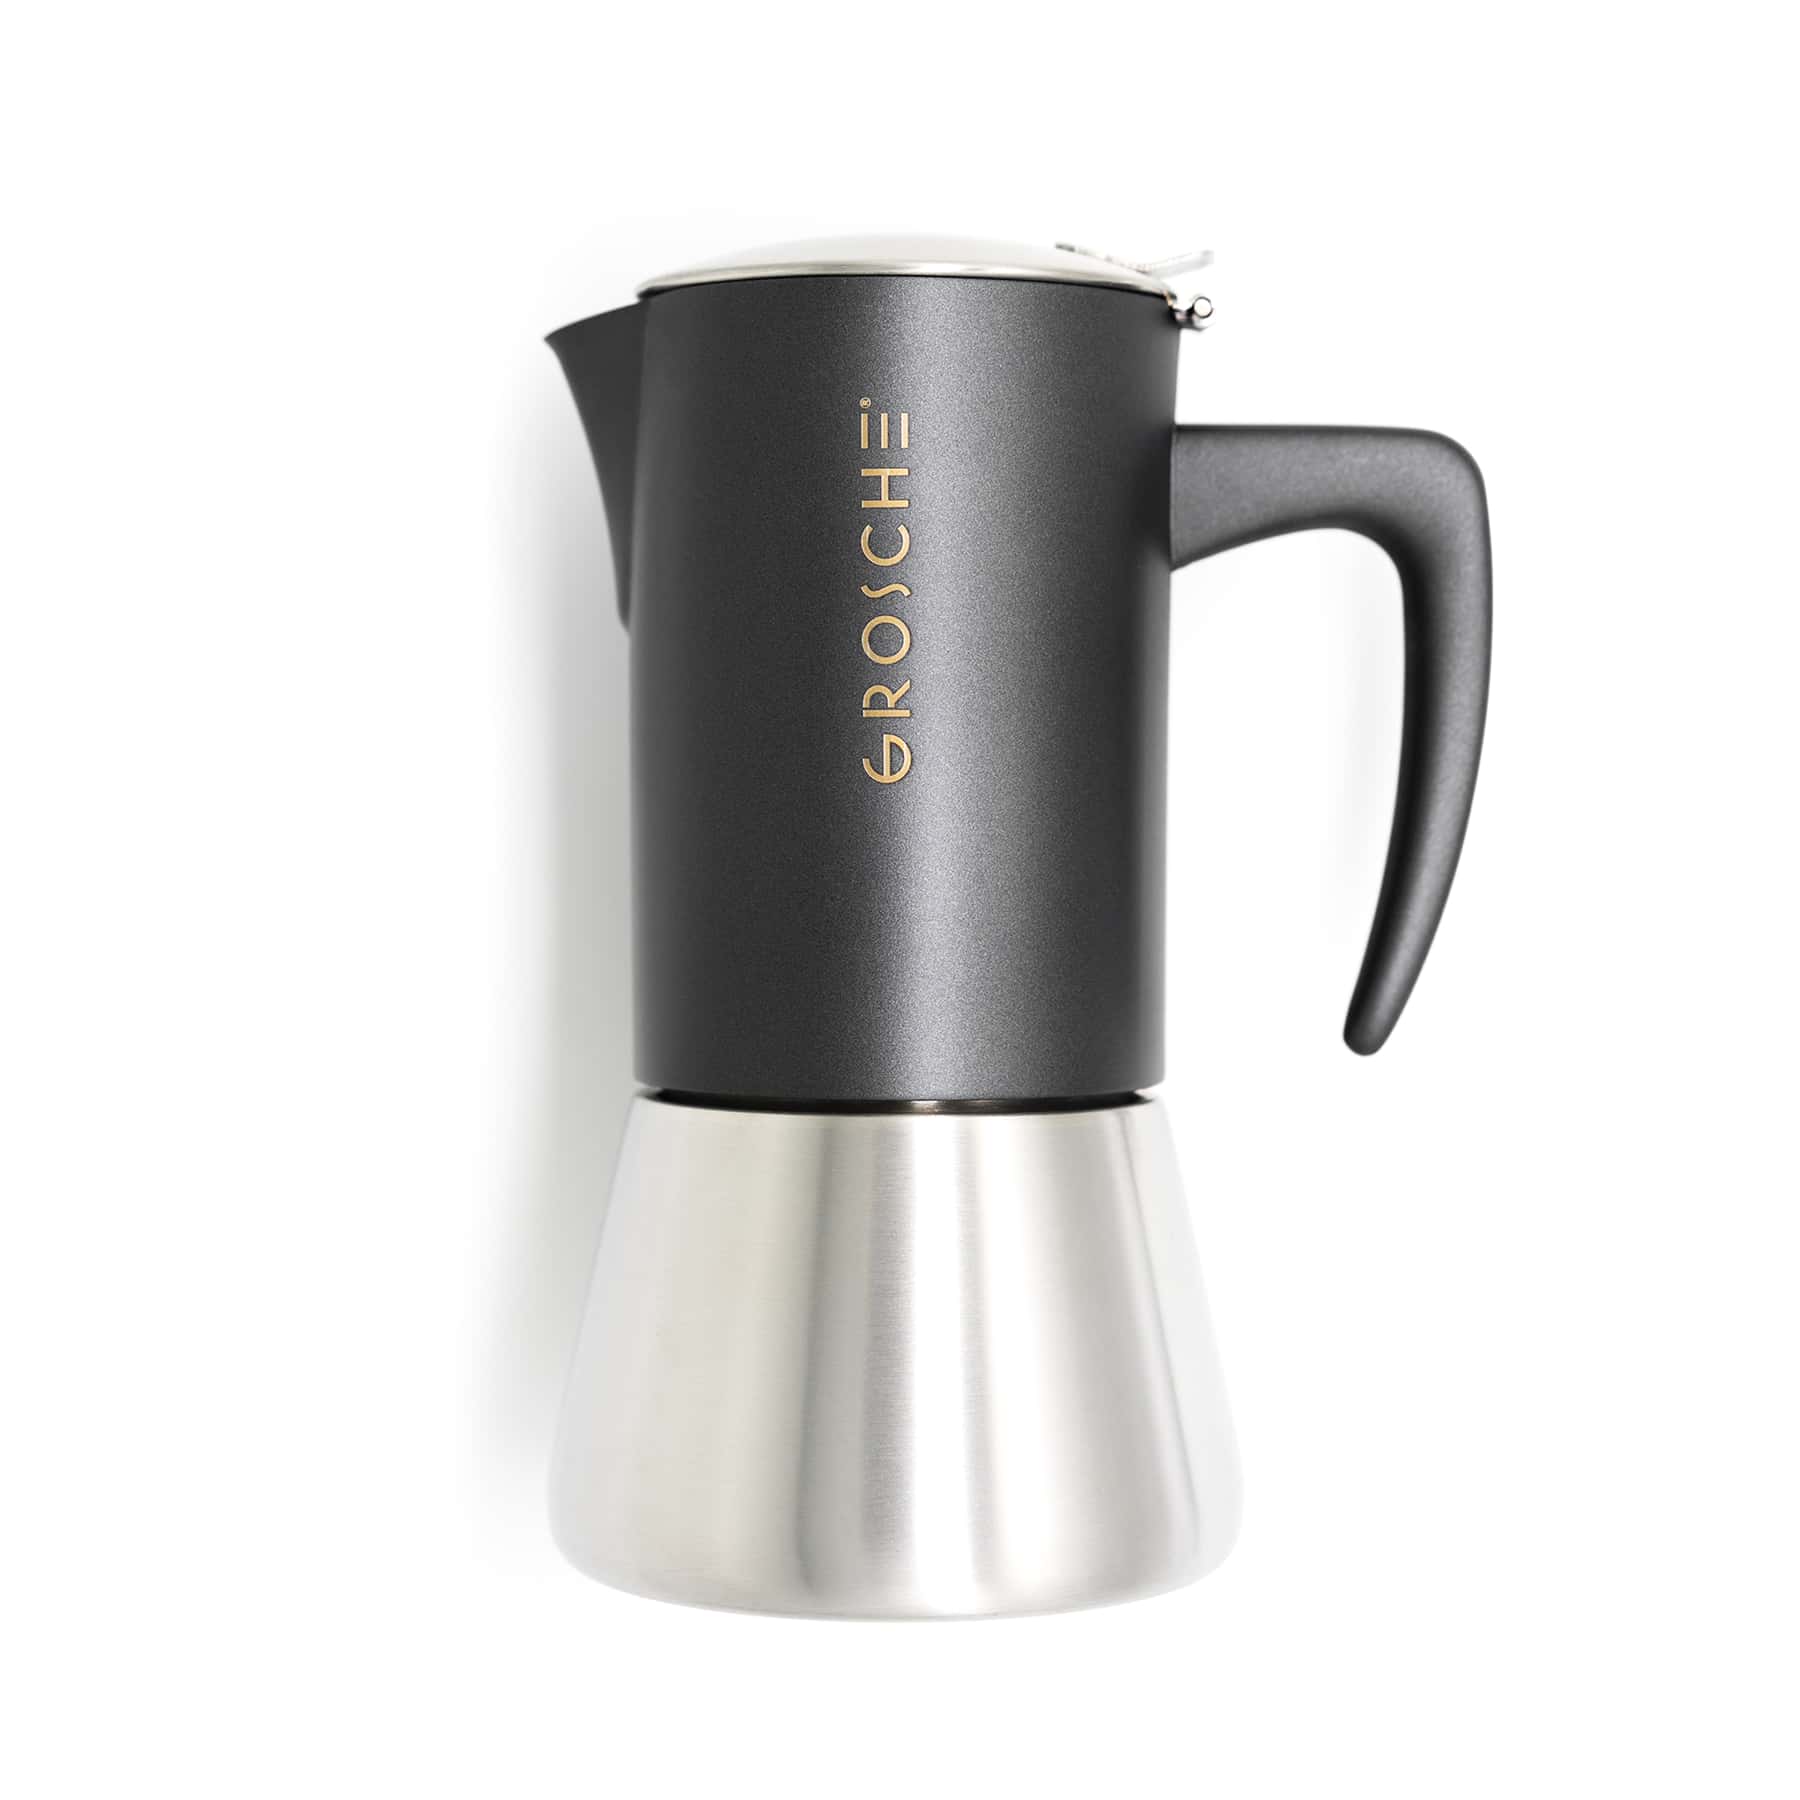 Grosche Moka 10 Cup Black SPecled Stainless Steel Induction Stovetop Espresso Maker